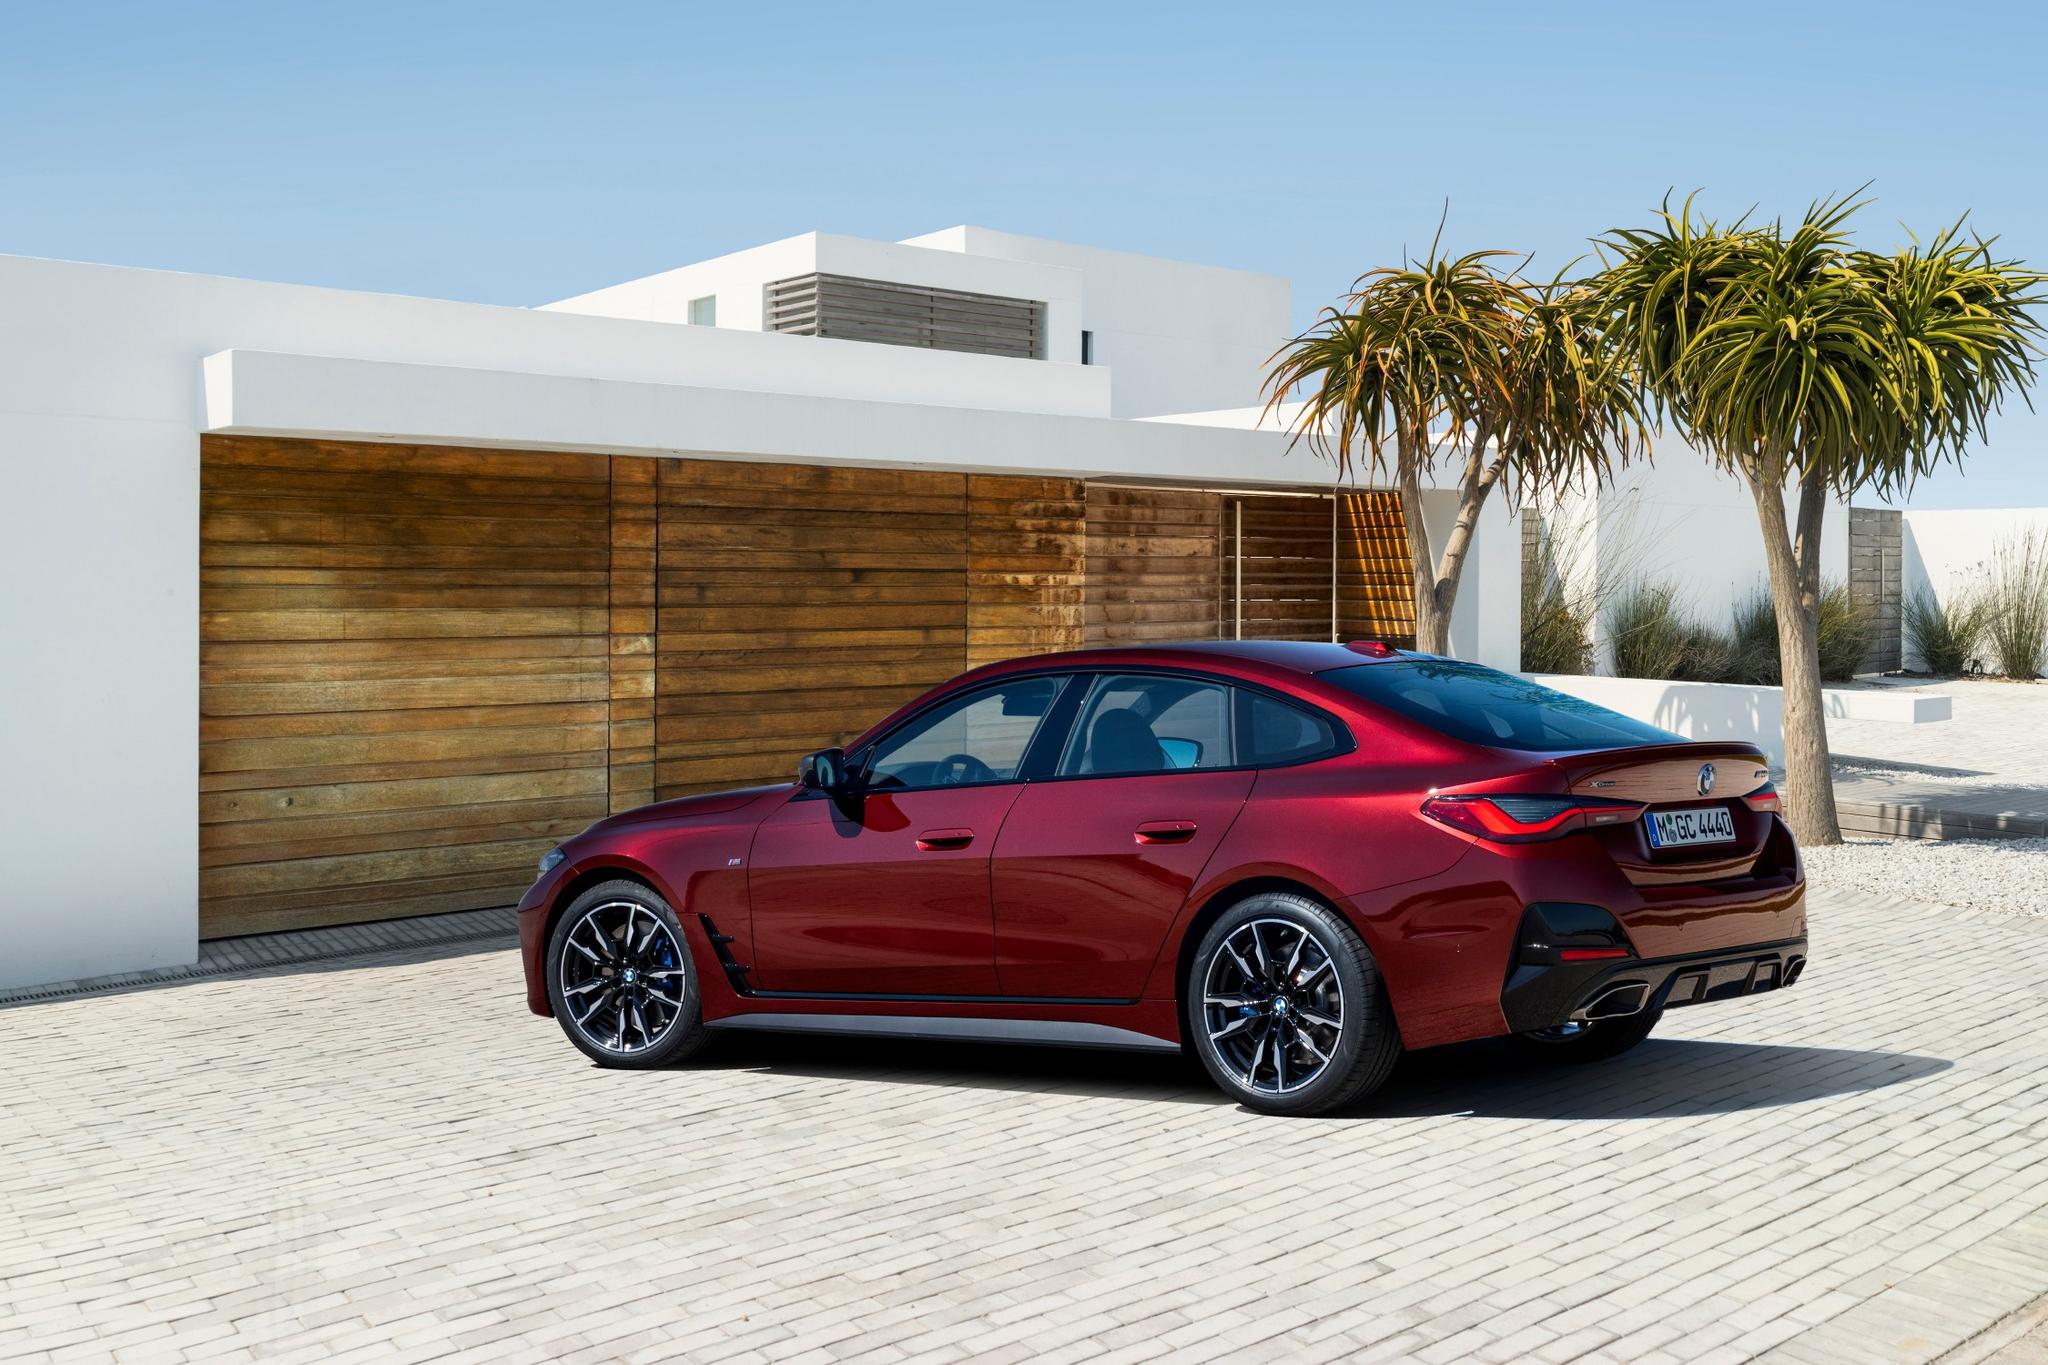 The all-new BMW 4 Series Gran Coupé